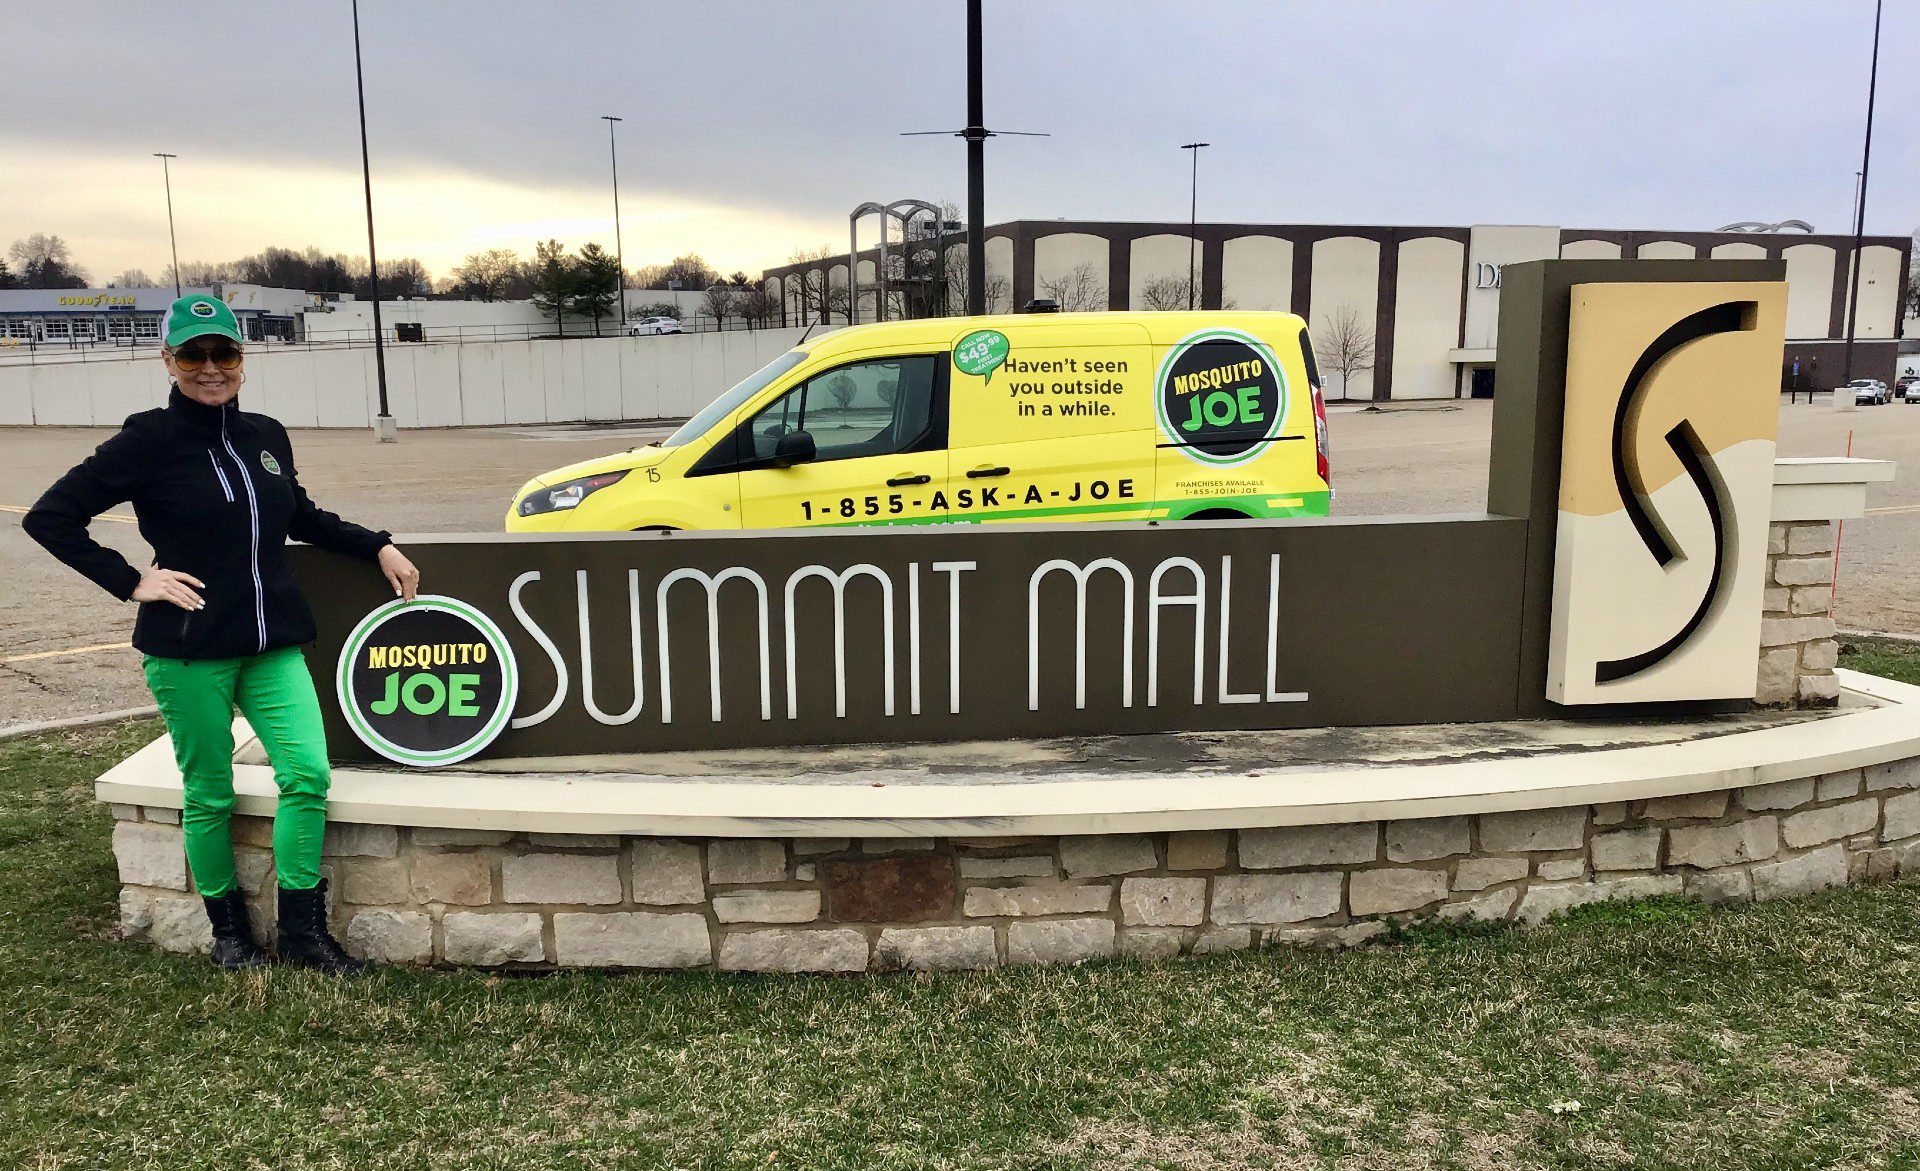 Mosquito Joe technician and service van pose beside the Summit Mall Sign in Ohio.